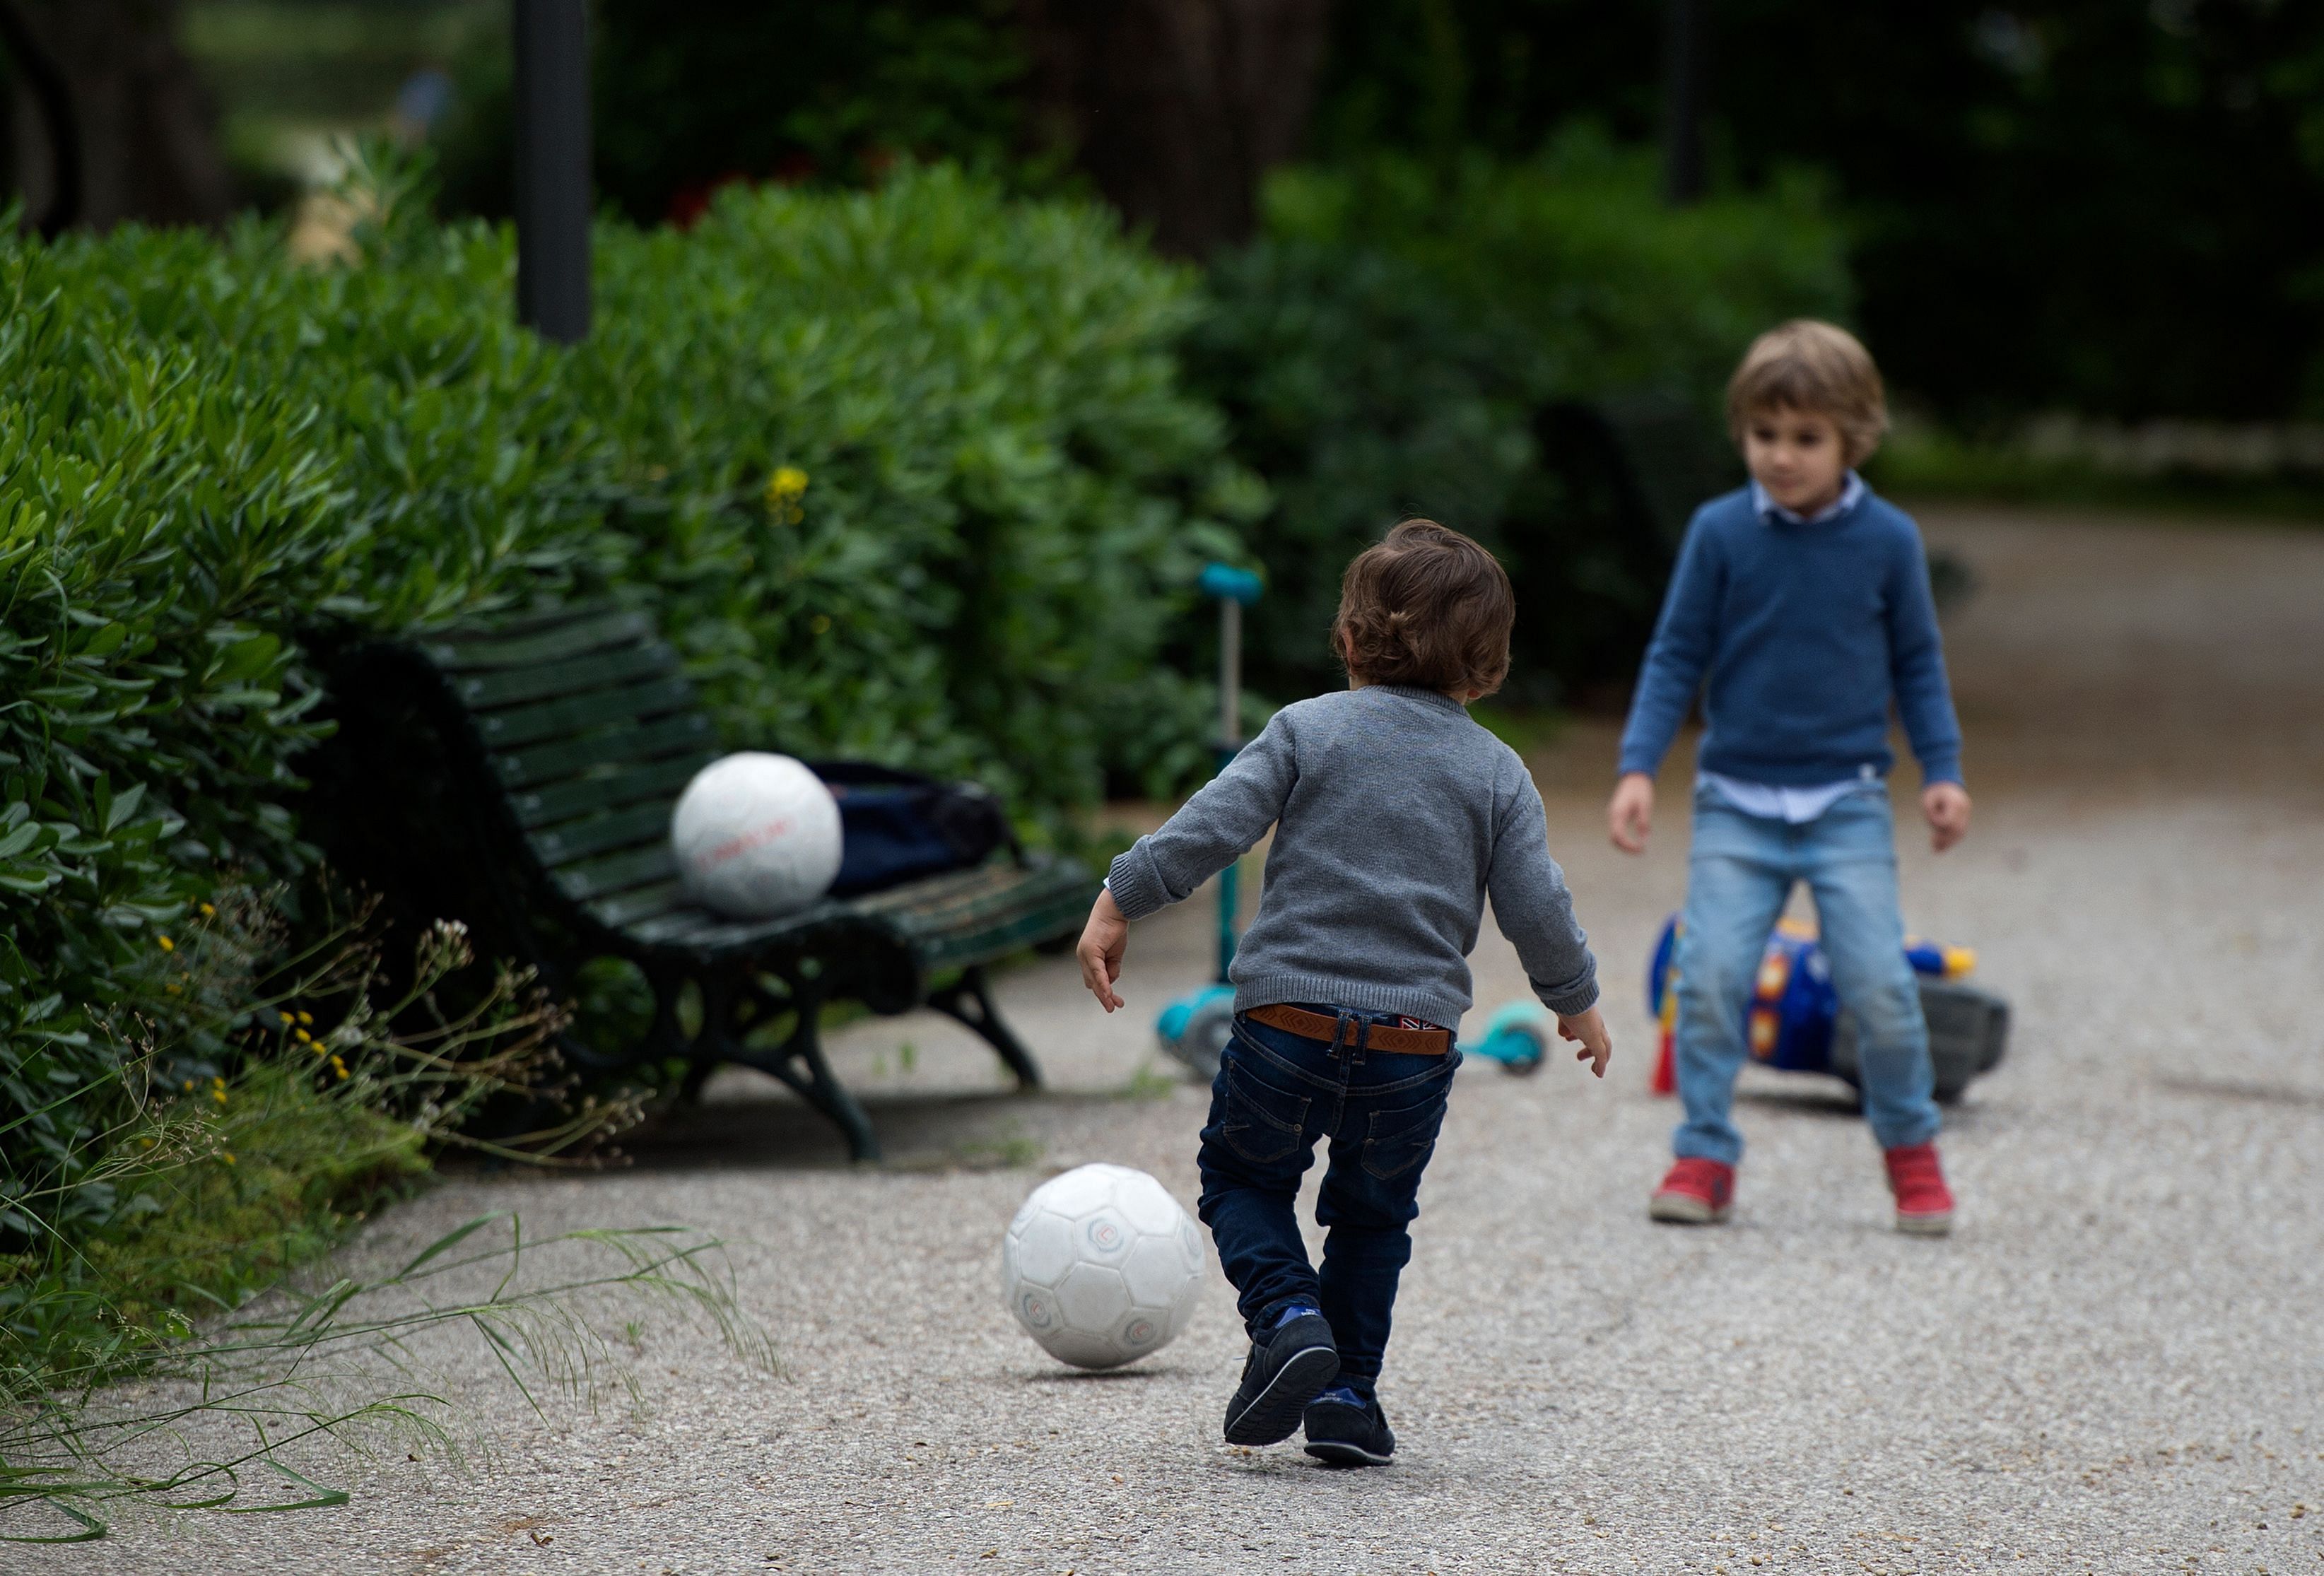 Children will be allowed one hour of supervised outdoor activity per day between 9 a.m. and 9 p.m., staying within one kilometre of their home. (Credit: AFP Photo)